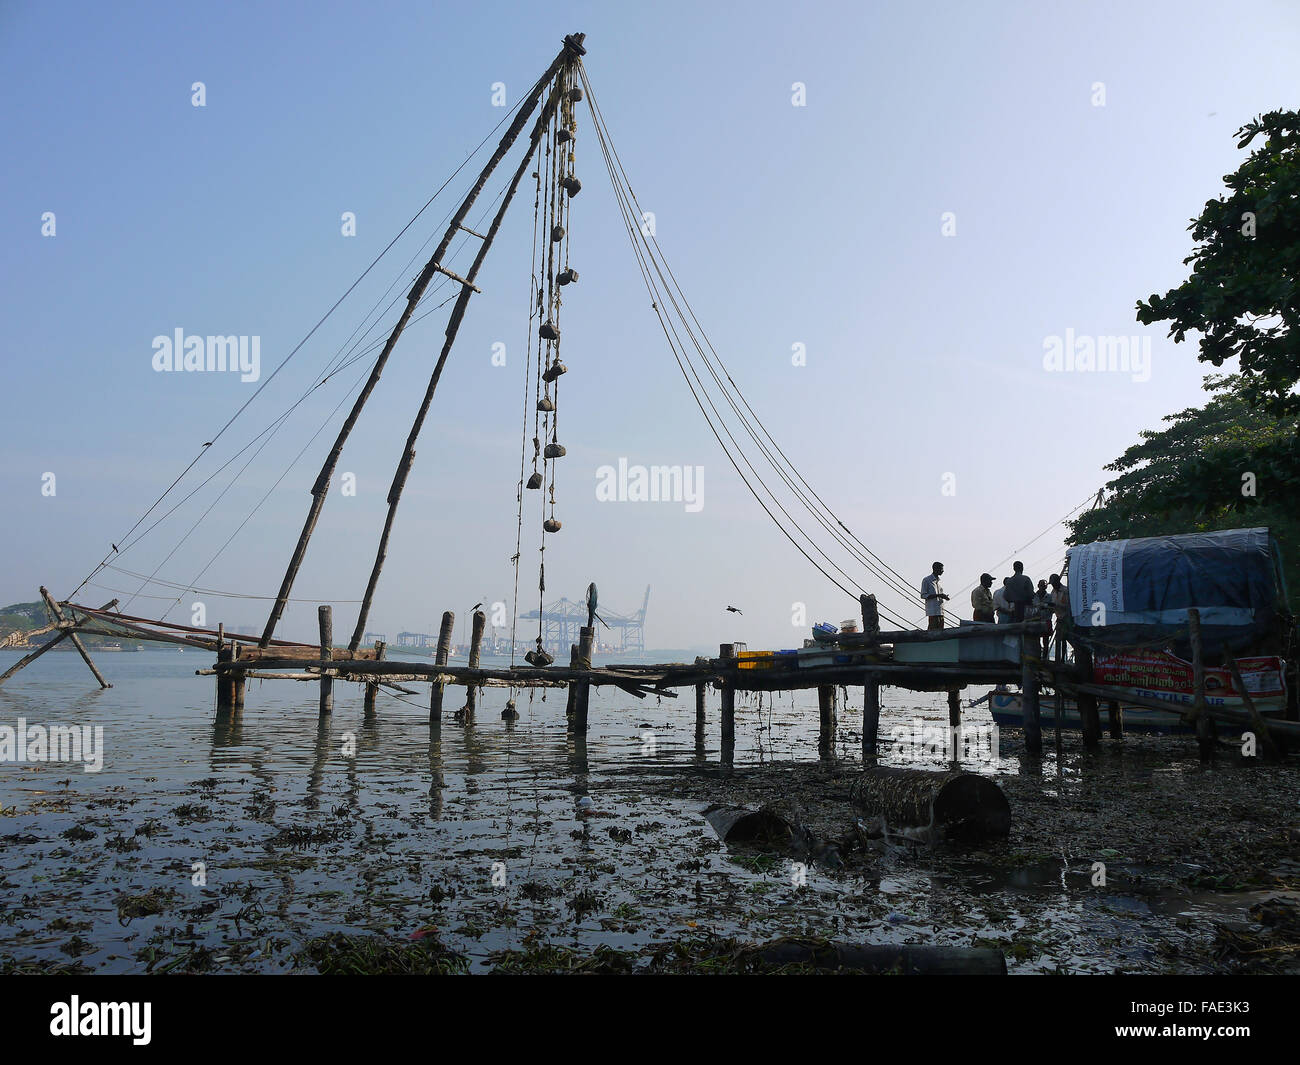 Chinese Fishing Net - This rustic rope and wooden structure stands tall .  Fishermen gather to one side of the net. Kochi India Stock Photo - Alamy